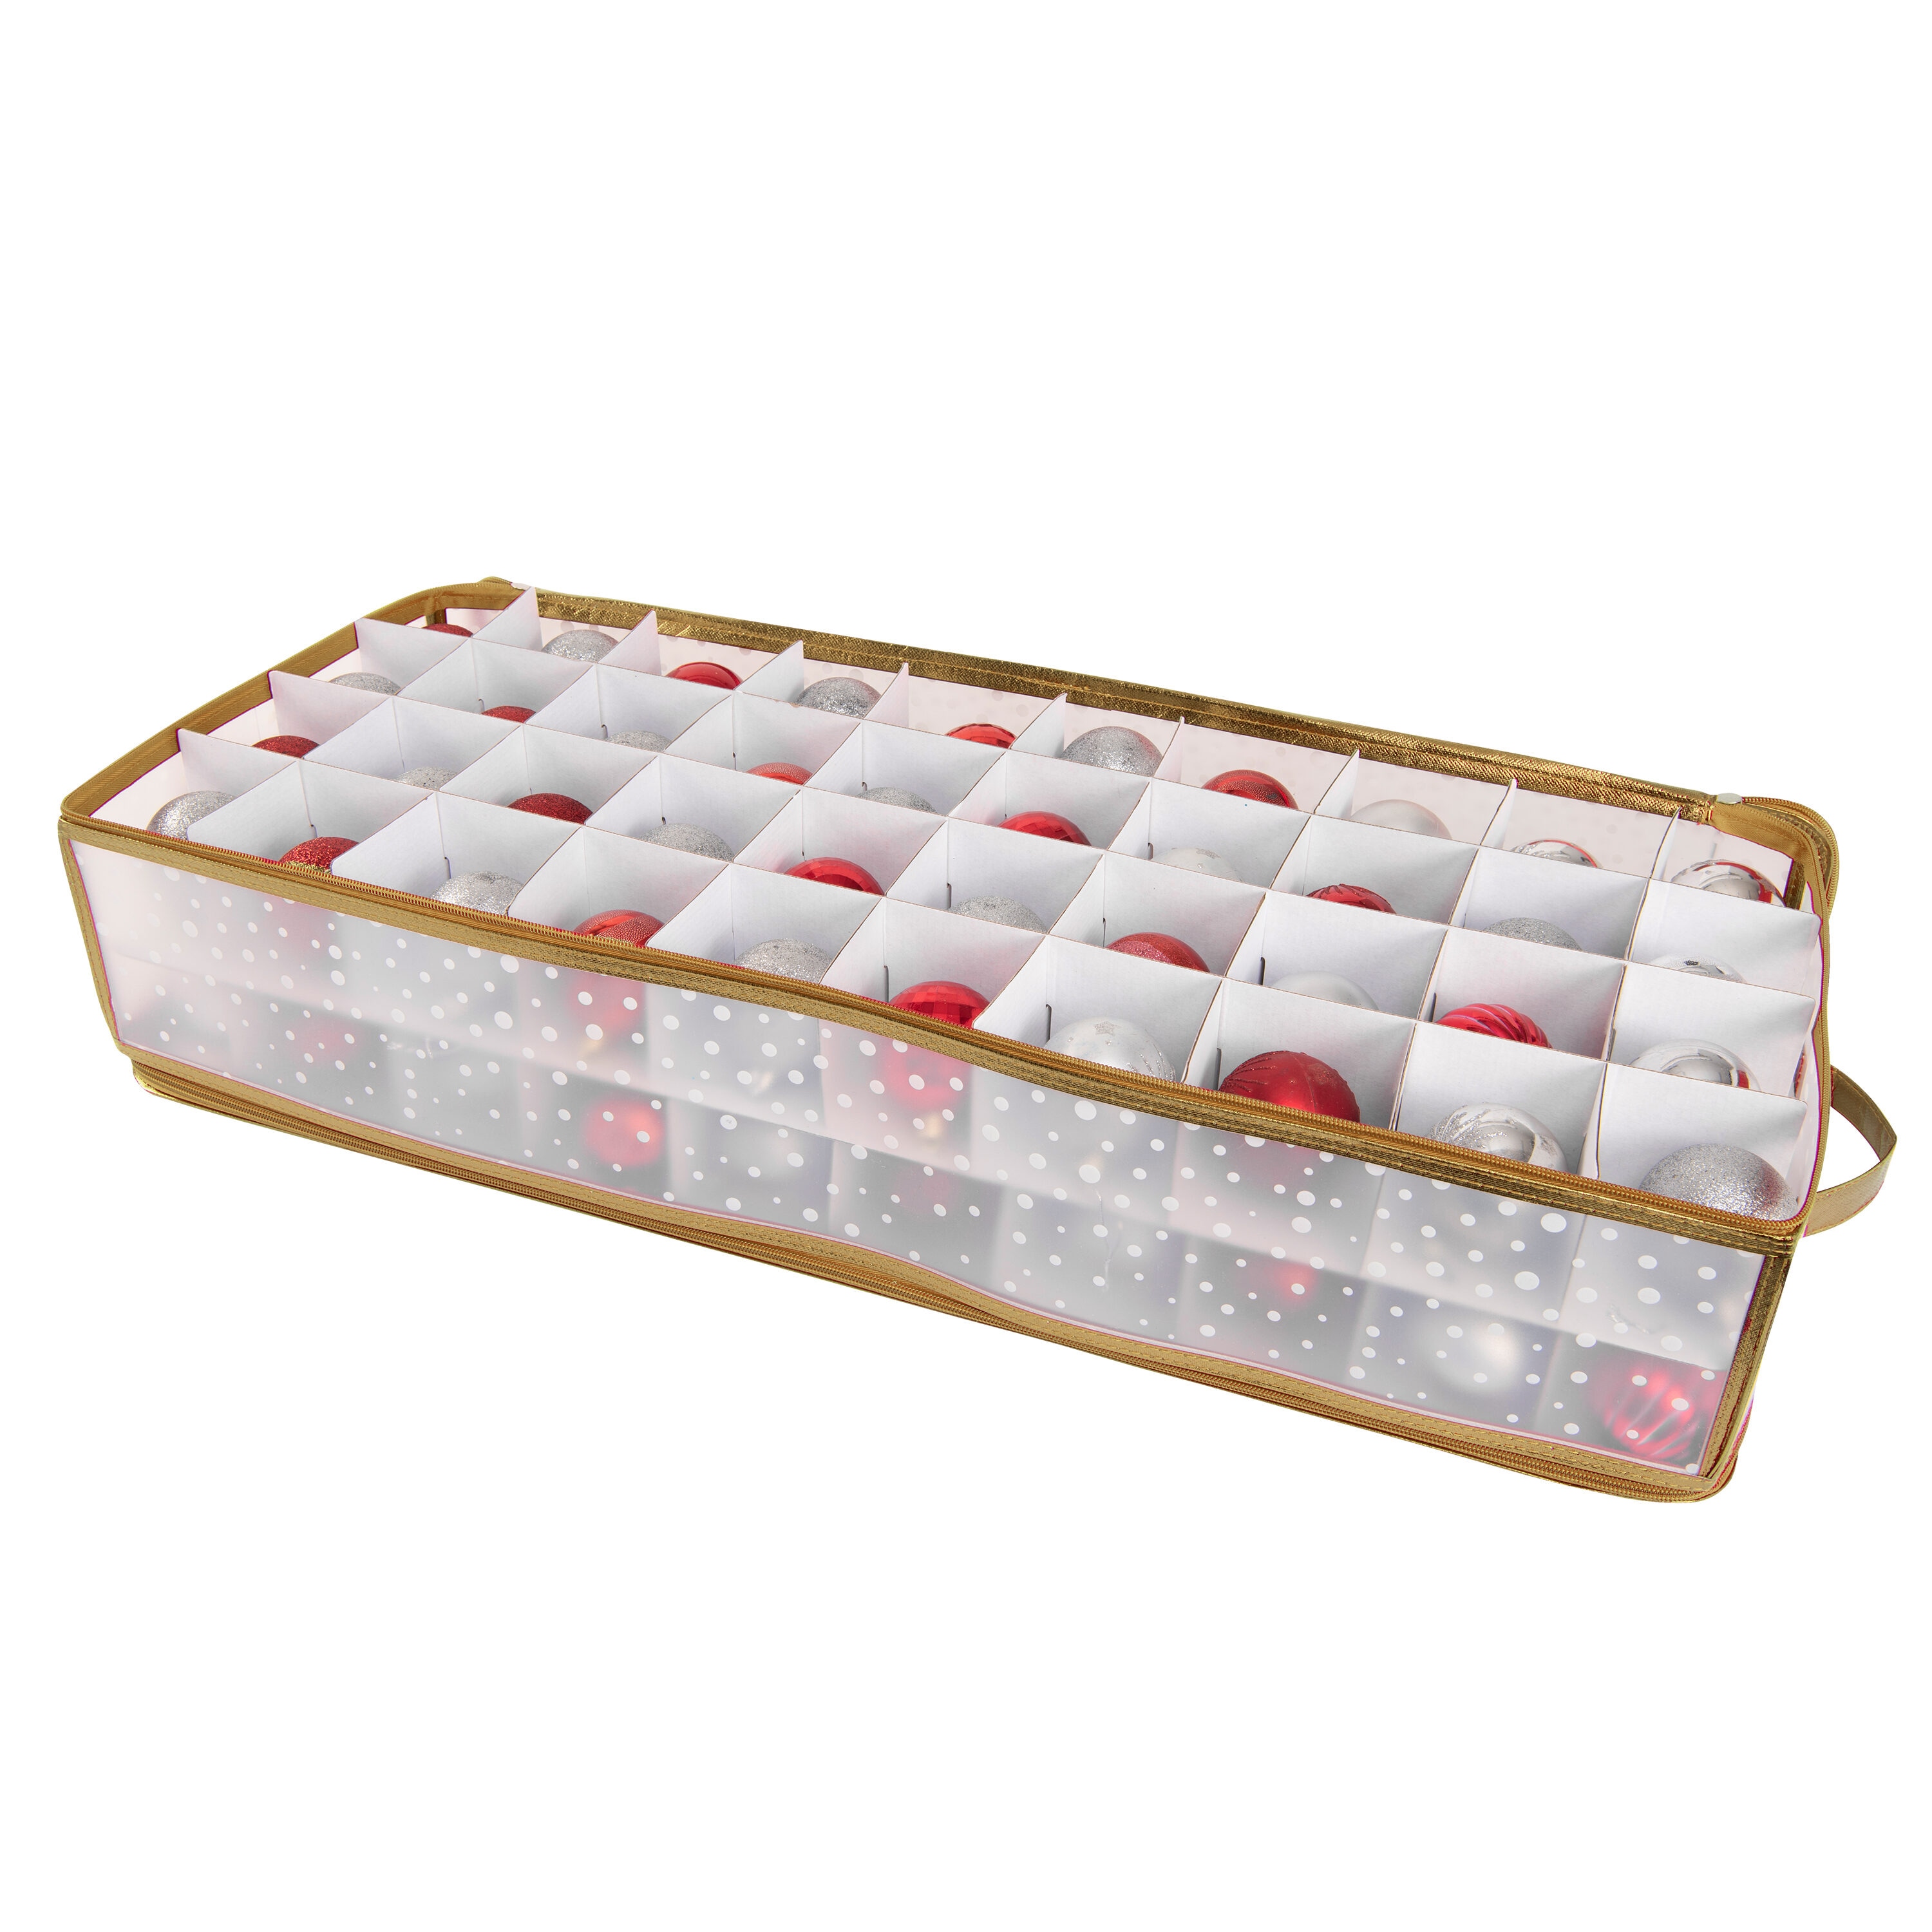 Simplify Ornament Organizer, 64-Count, Red (9002-RED)